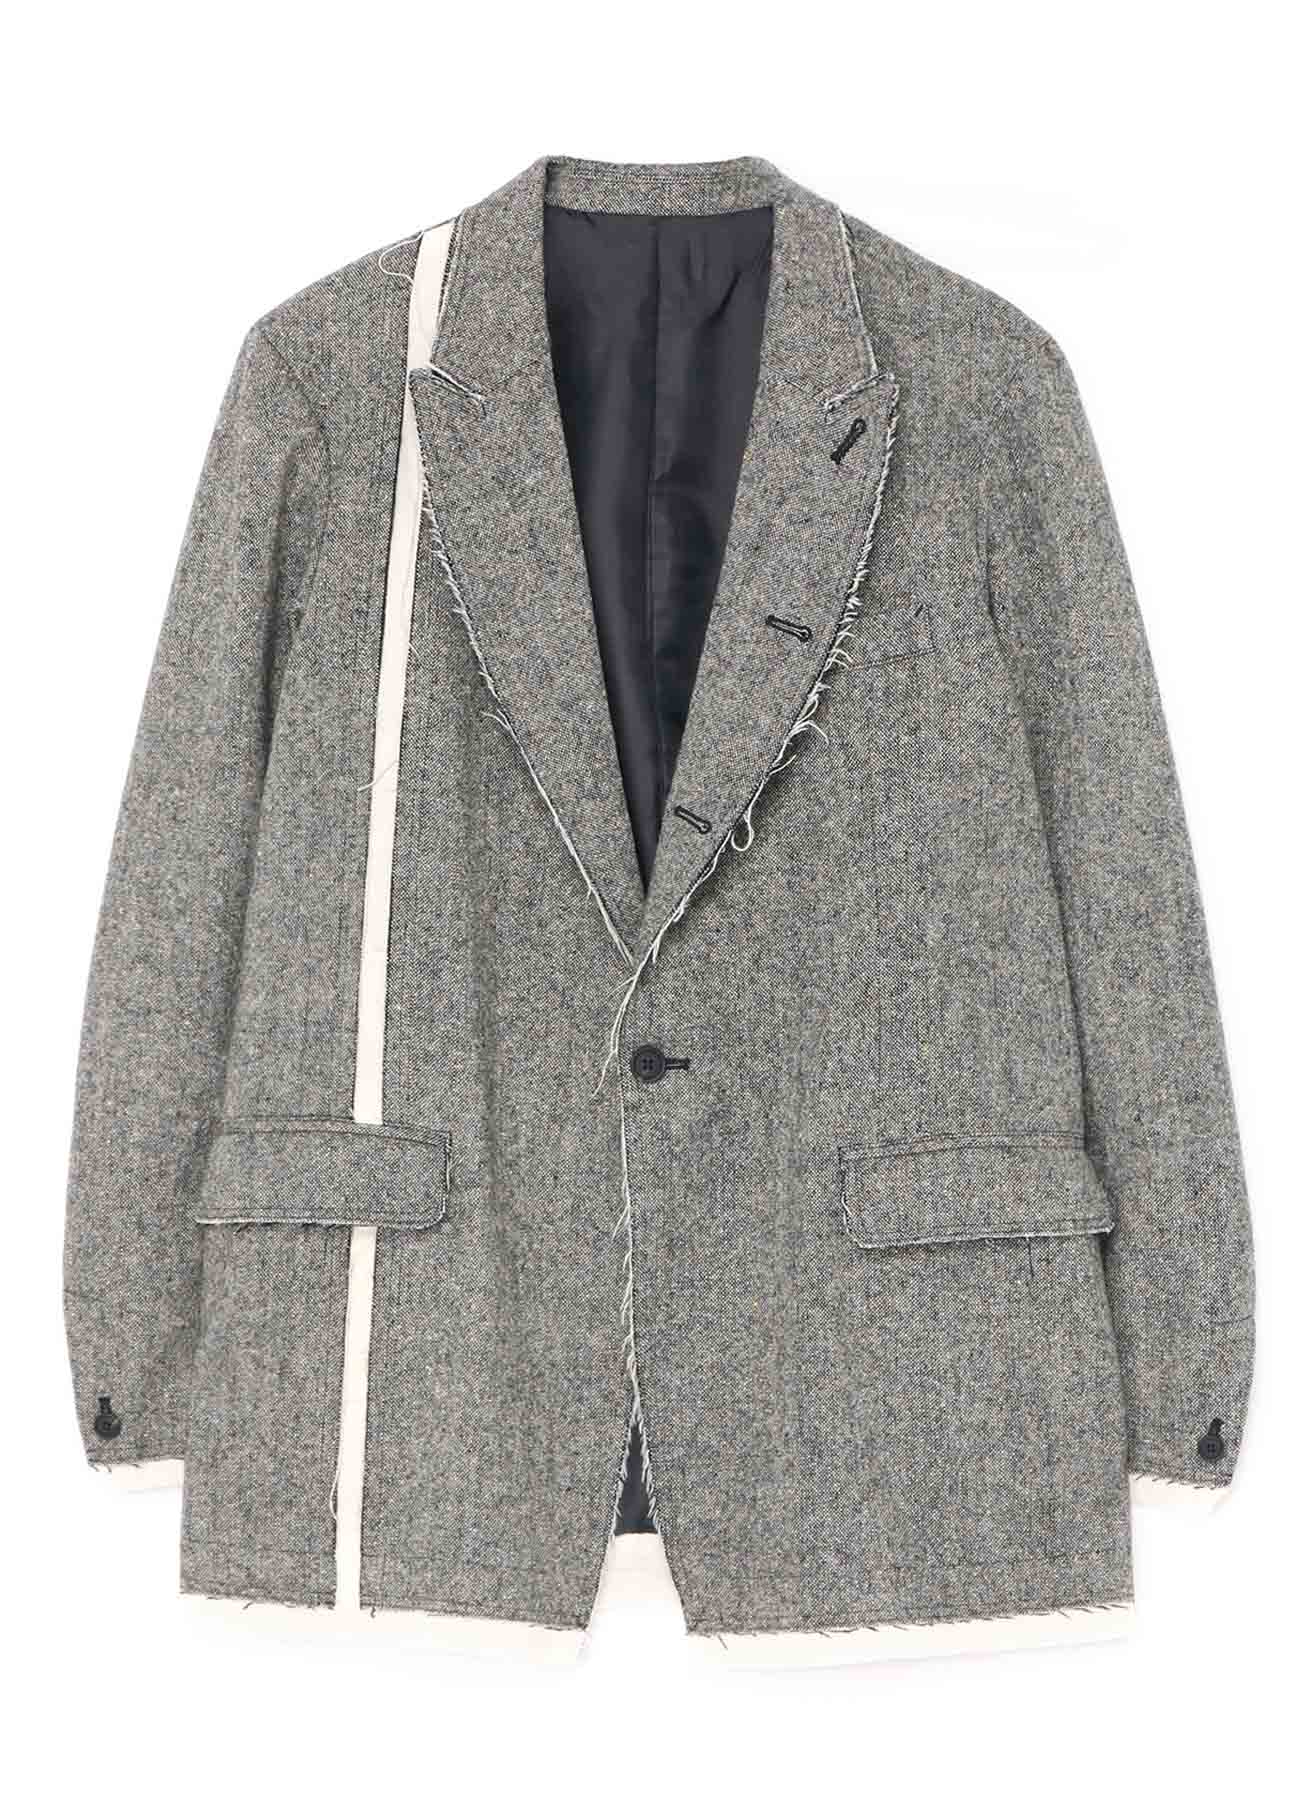 ETERMINE NEP TWEED+COTTON TWILL RIGHT-FRONT SWITCHED PEAKED LAPEL JACKET